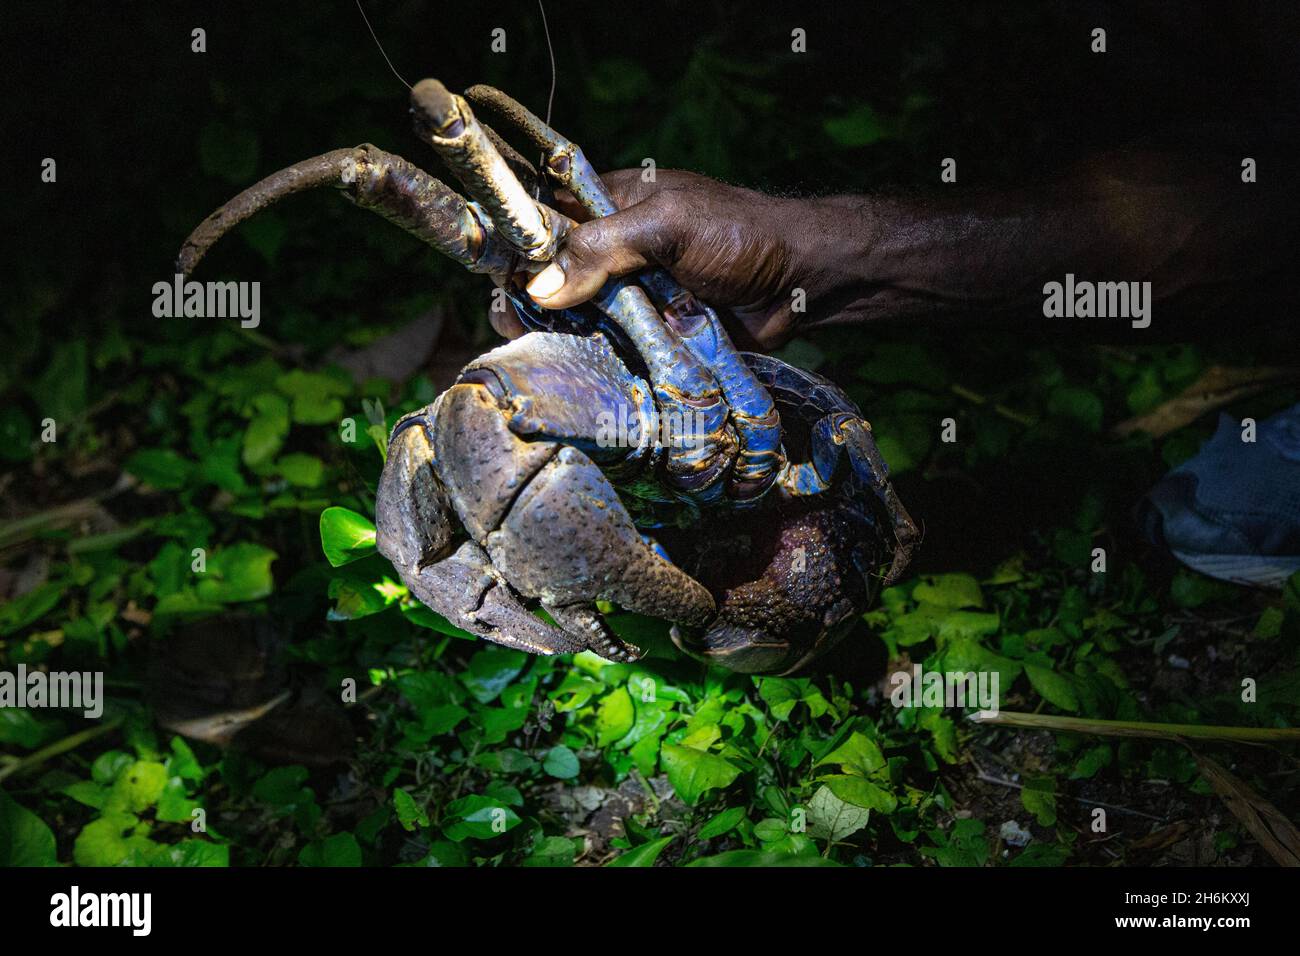 Large Coconut Crab on Tetepare Island, a nature reserve in the Solomon Islands. Stock Photo